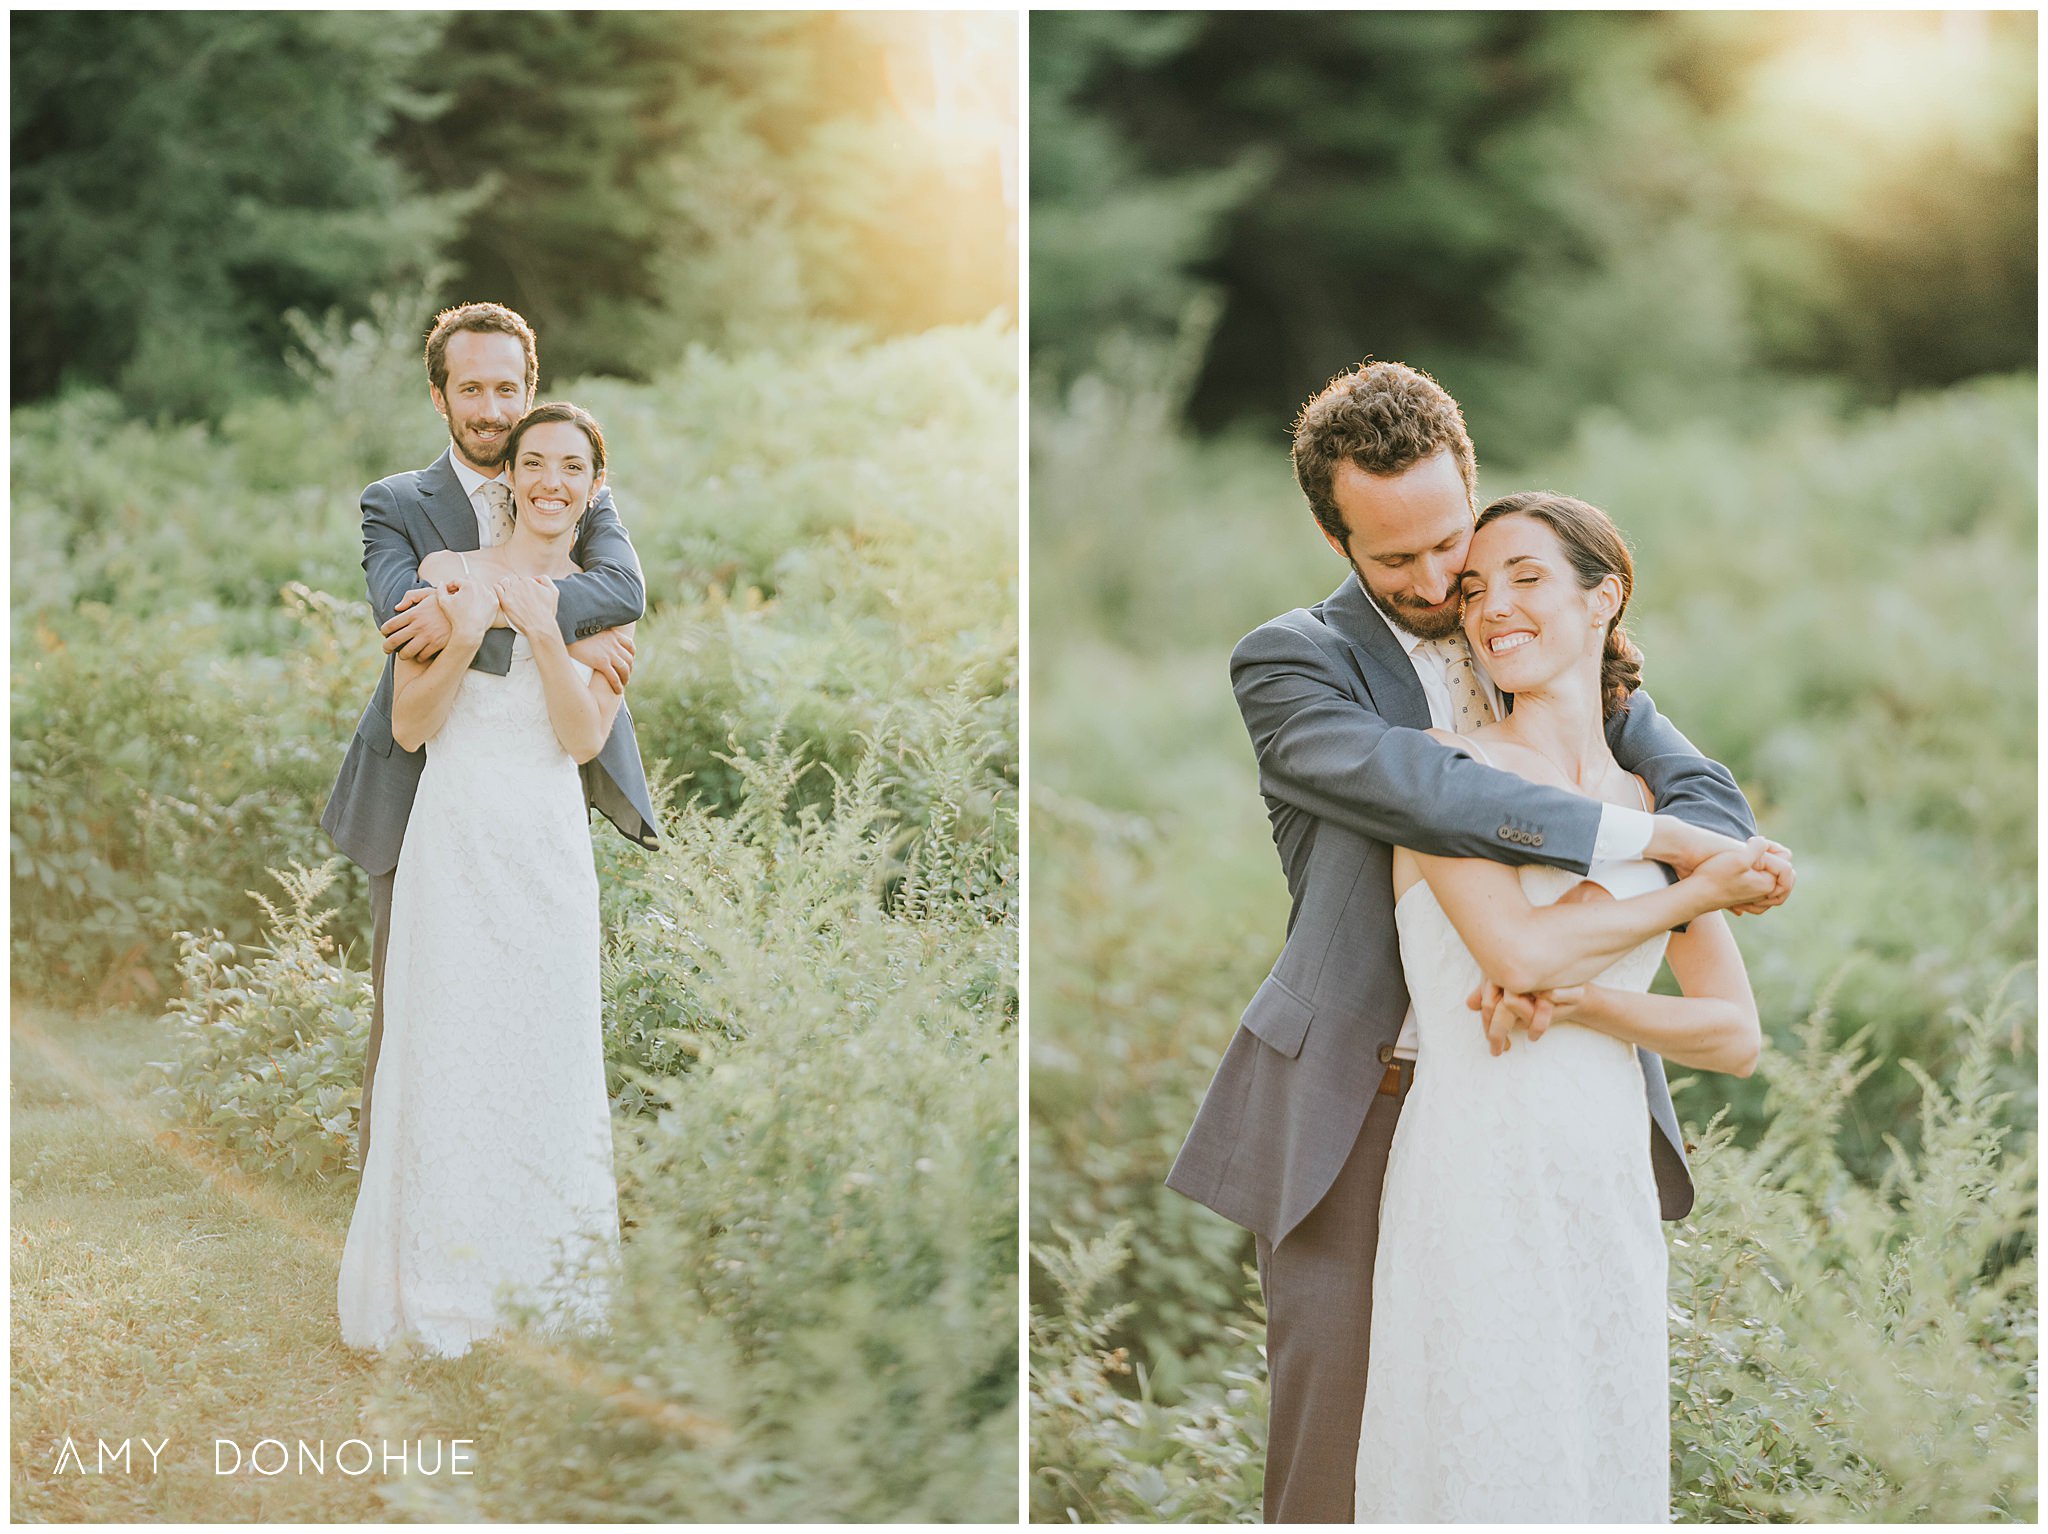 Bride and Groom Golden Hour Photos |The Fells Estate | New Hampshire Wedding Photographer | © Amy Donohue Photography